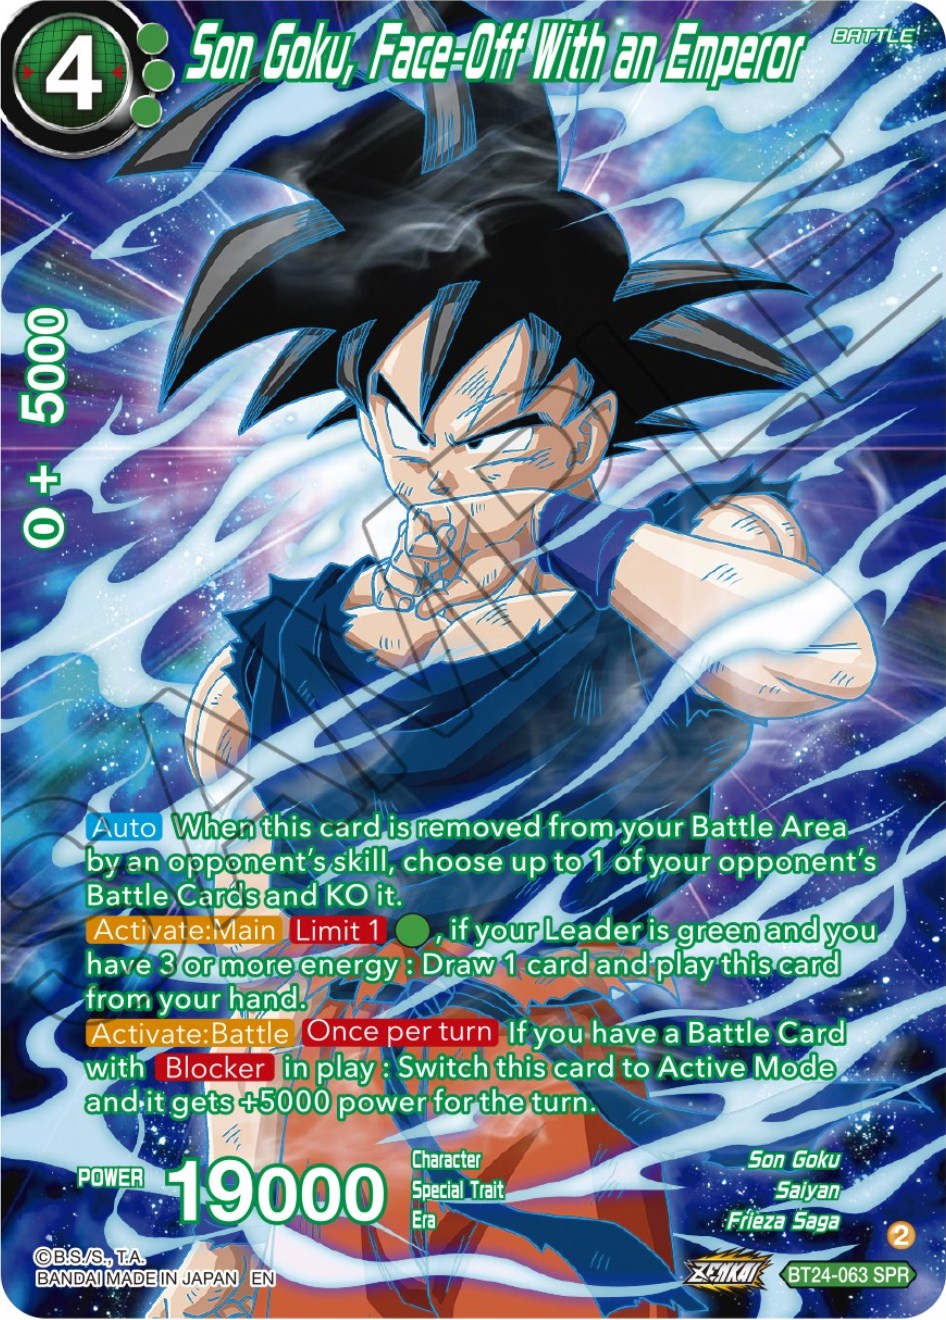 Son Goku, Face-Off With an Emperor (SPR) (BT24-063) [Beyond Generations] | Total Play